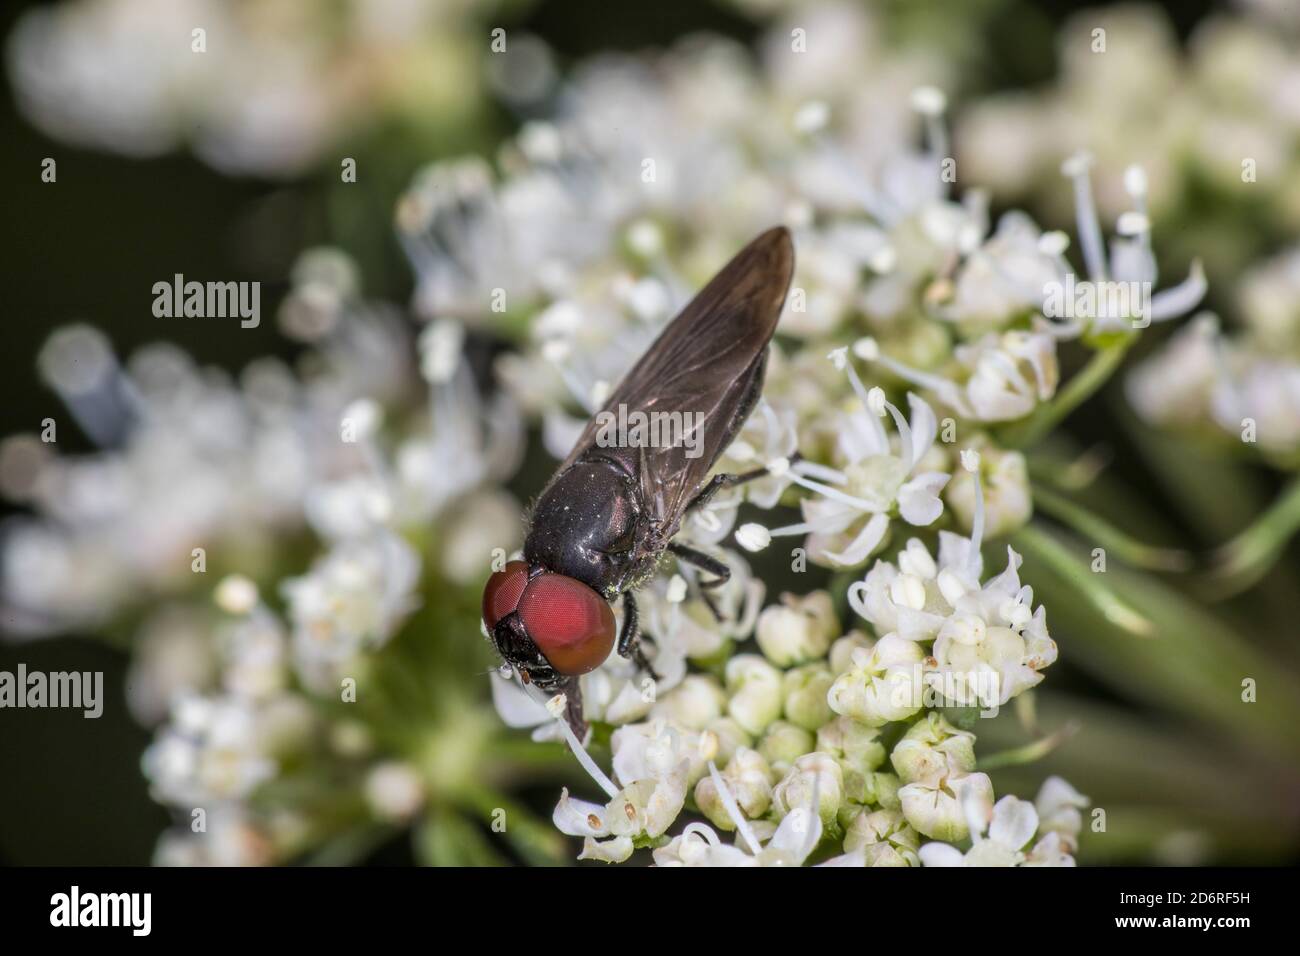 hoverfly (Chrysogaster solstitialis), sitting on white blossoms, side view, Germany Stock Photo